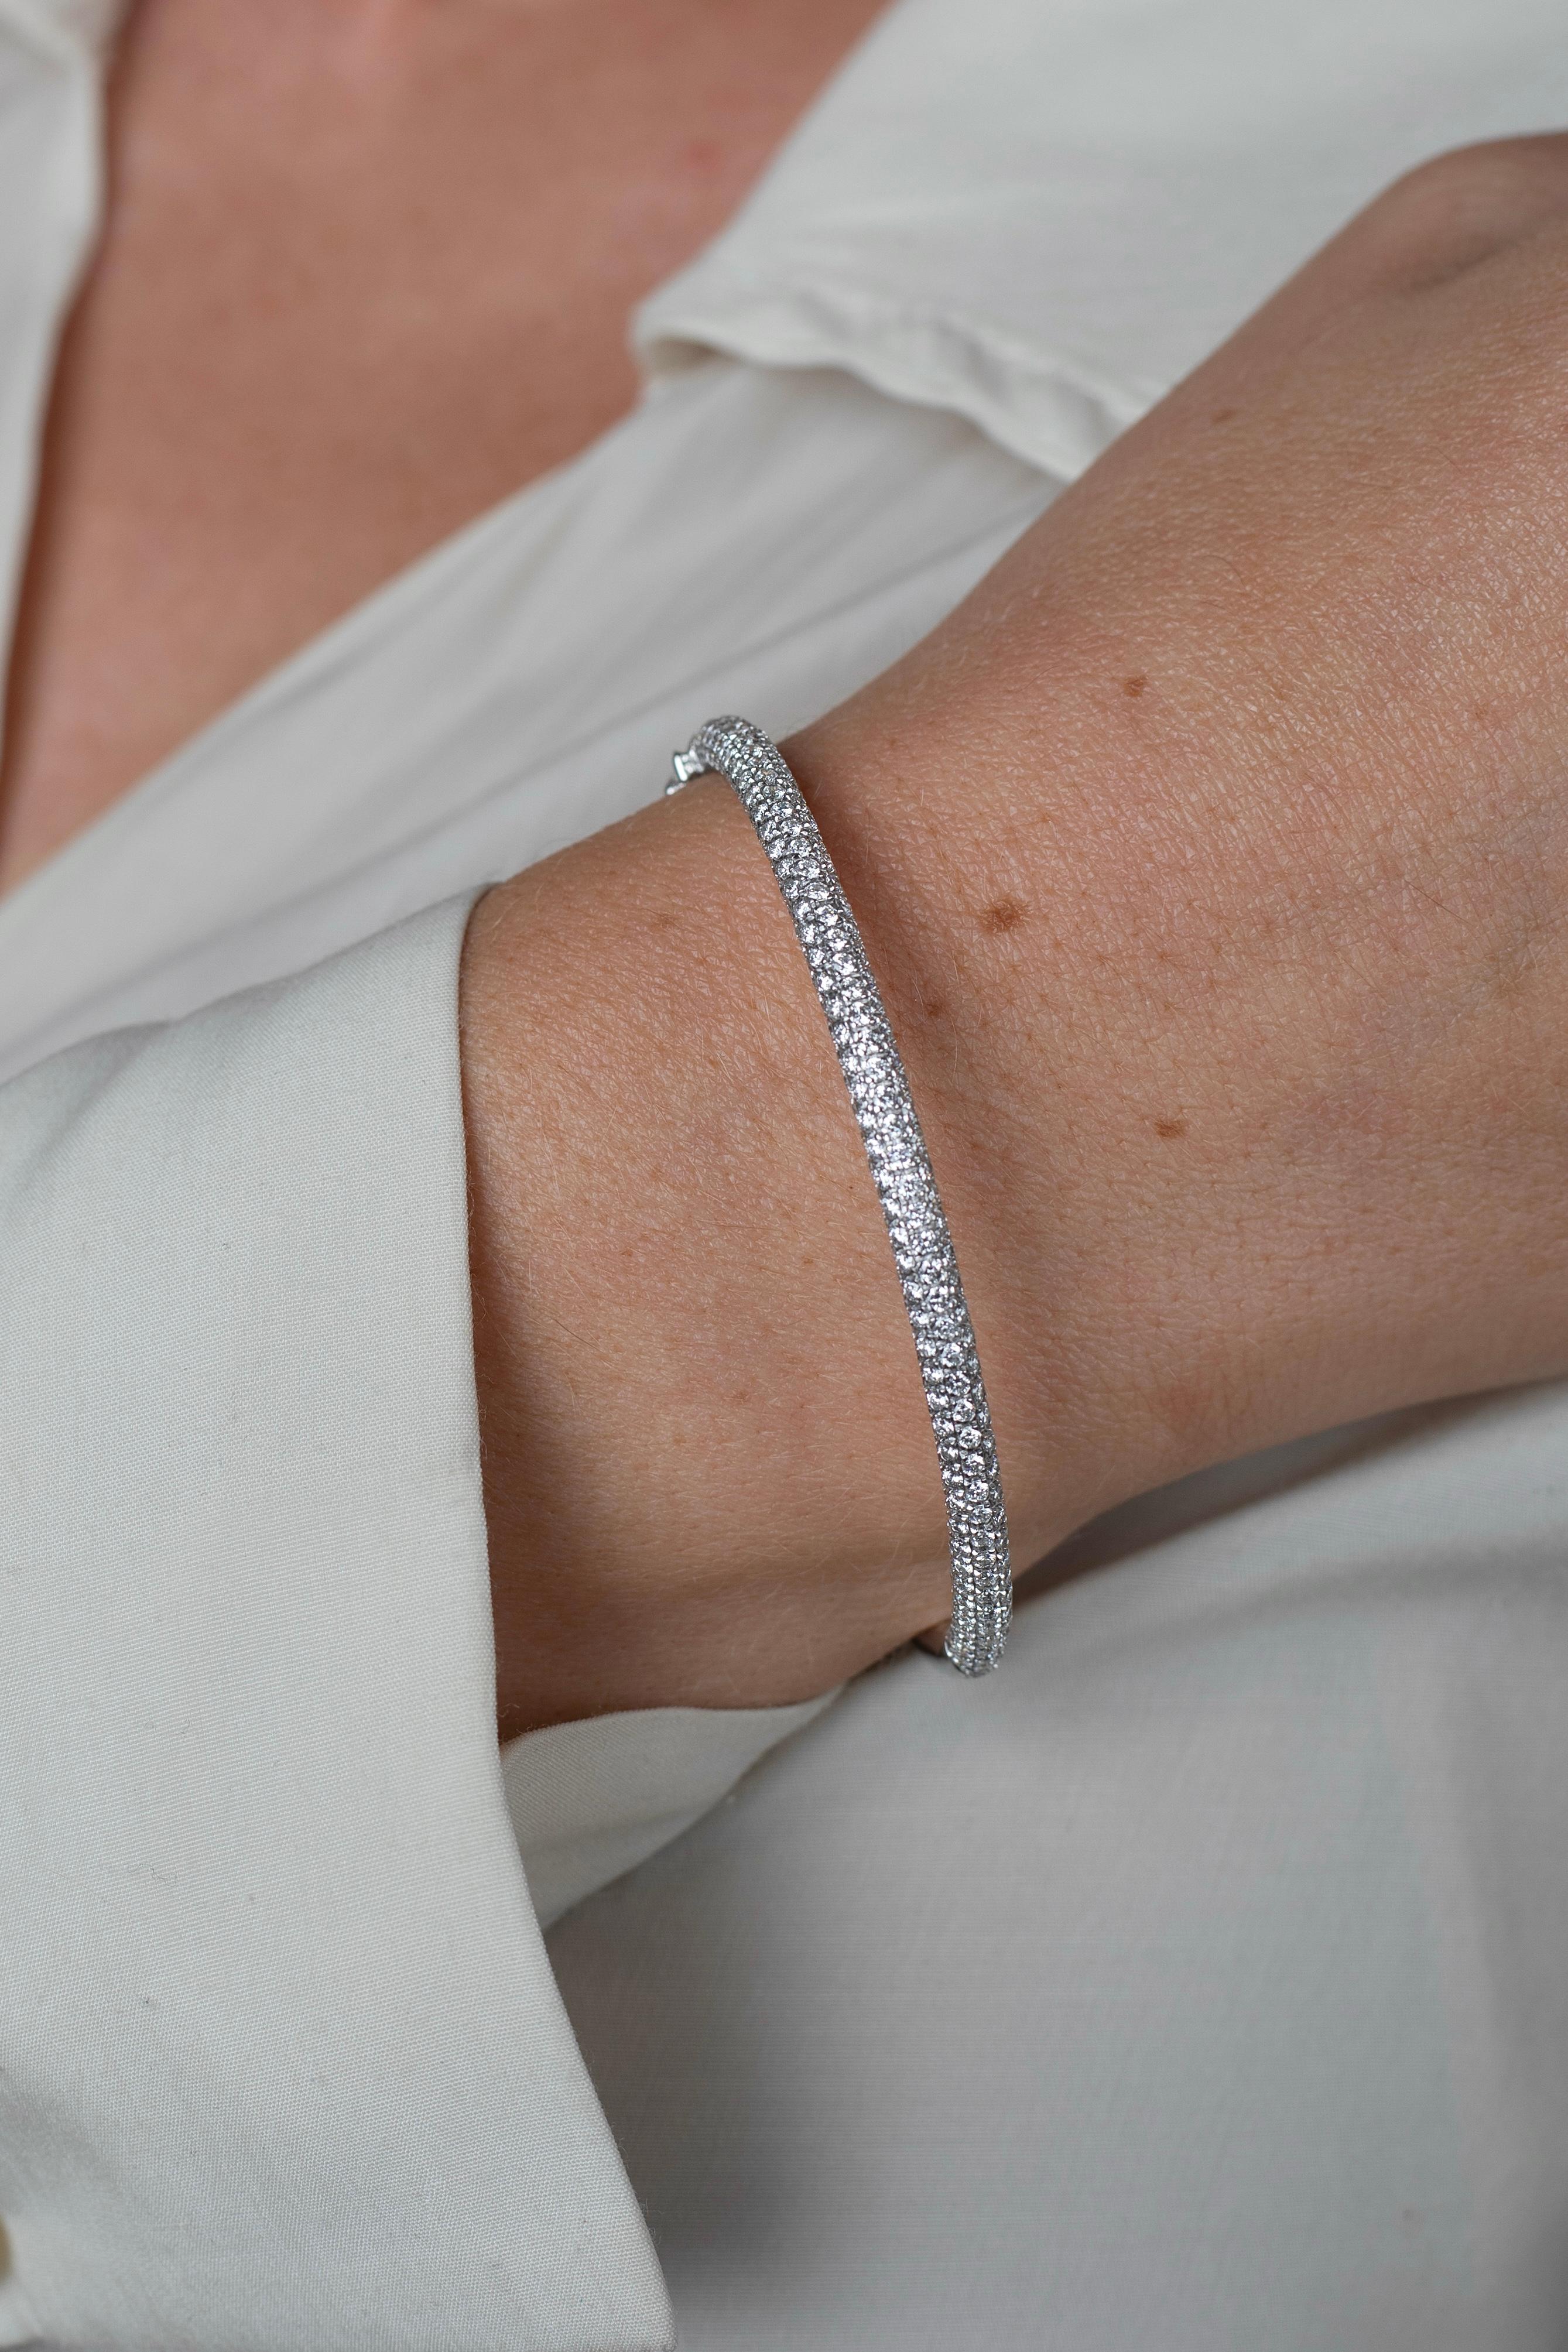 Micro pave set round brilliant cut natural diamonds mount this stunning 18 karat white gold bangle bracelet. Handmade with a box closure and double safety for a secure fit, making it ideal for daily wear. Waterproof, hypoallergenic, and meticulously